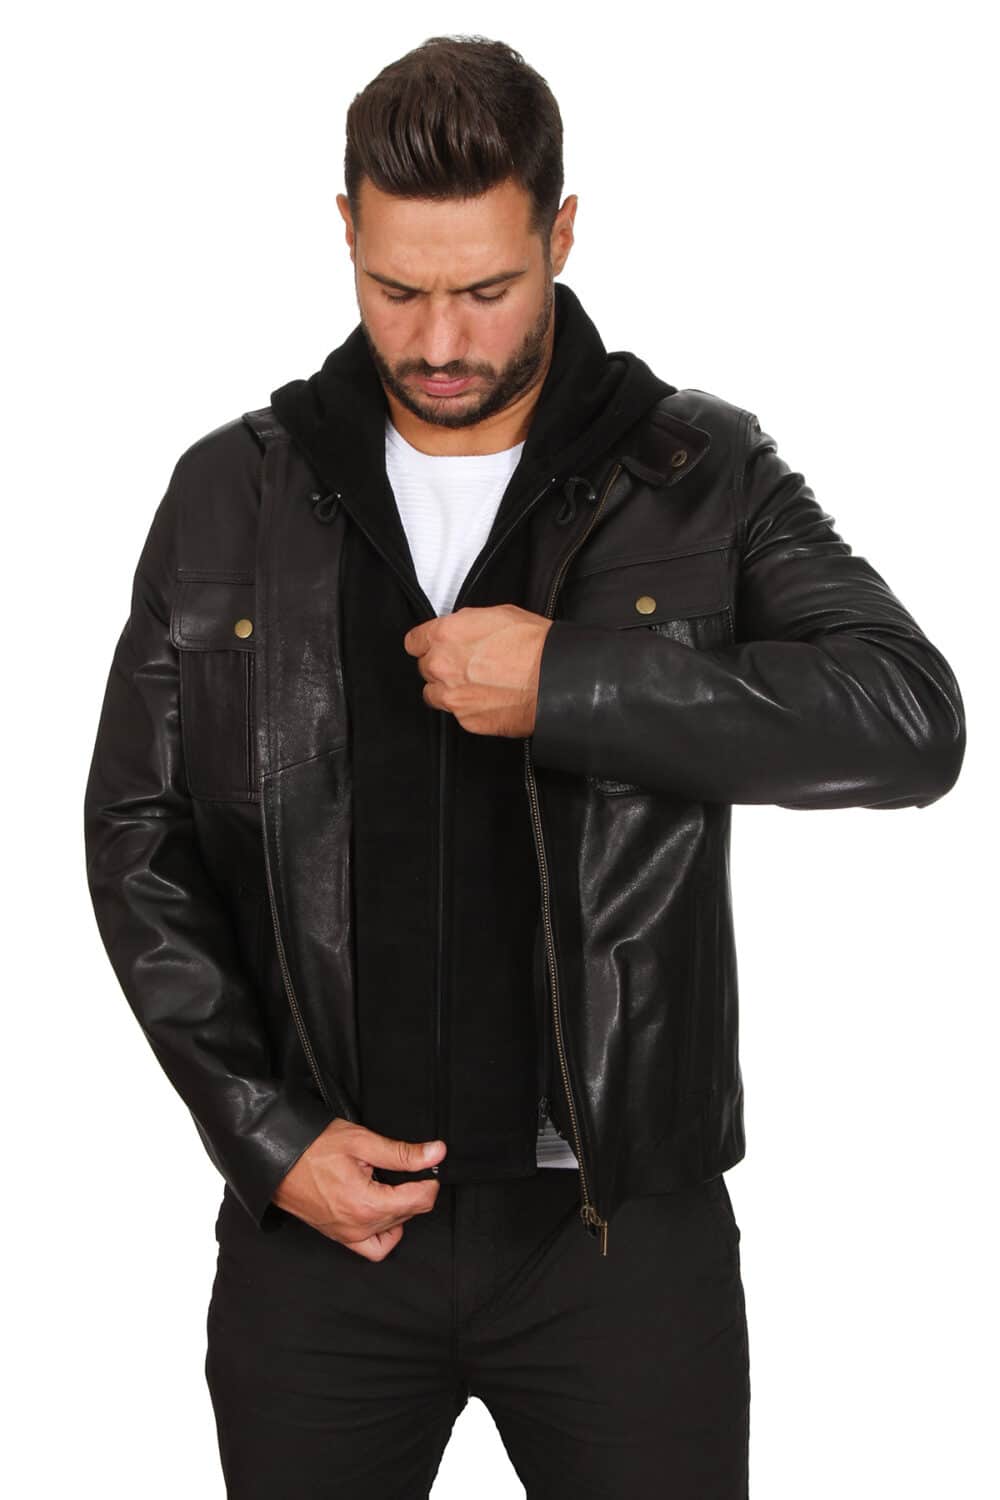 Looking For Brown Mens Fashion Leather Jacket? All Sizes Here